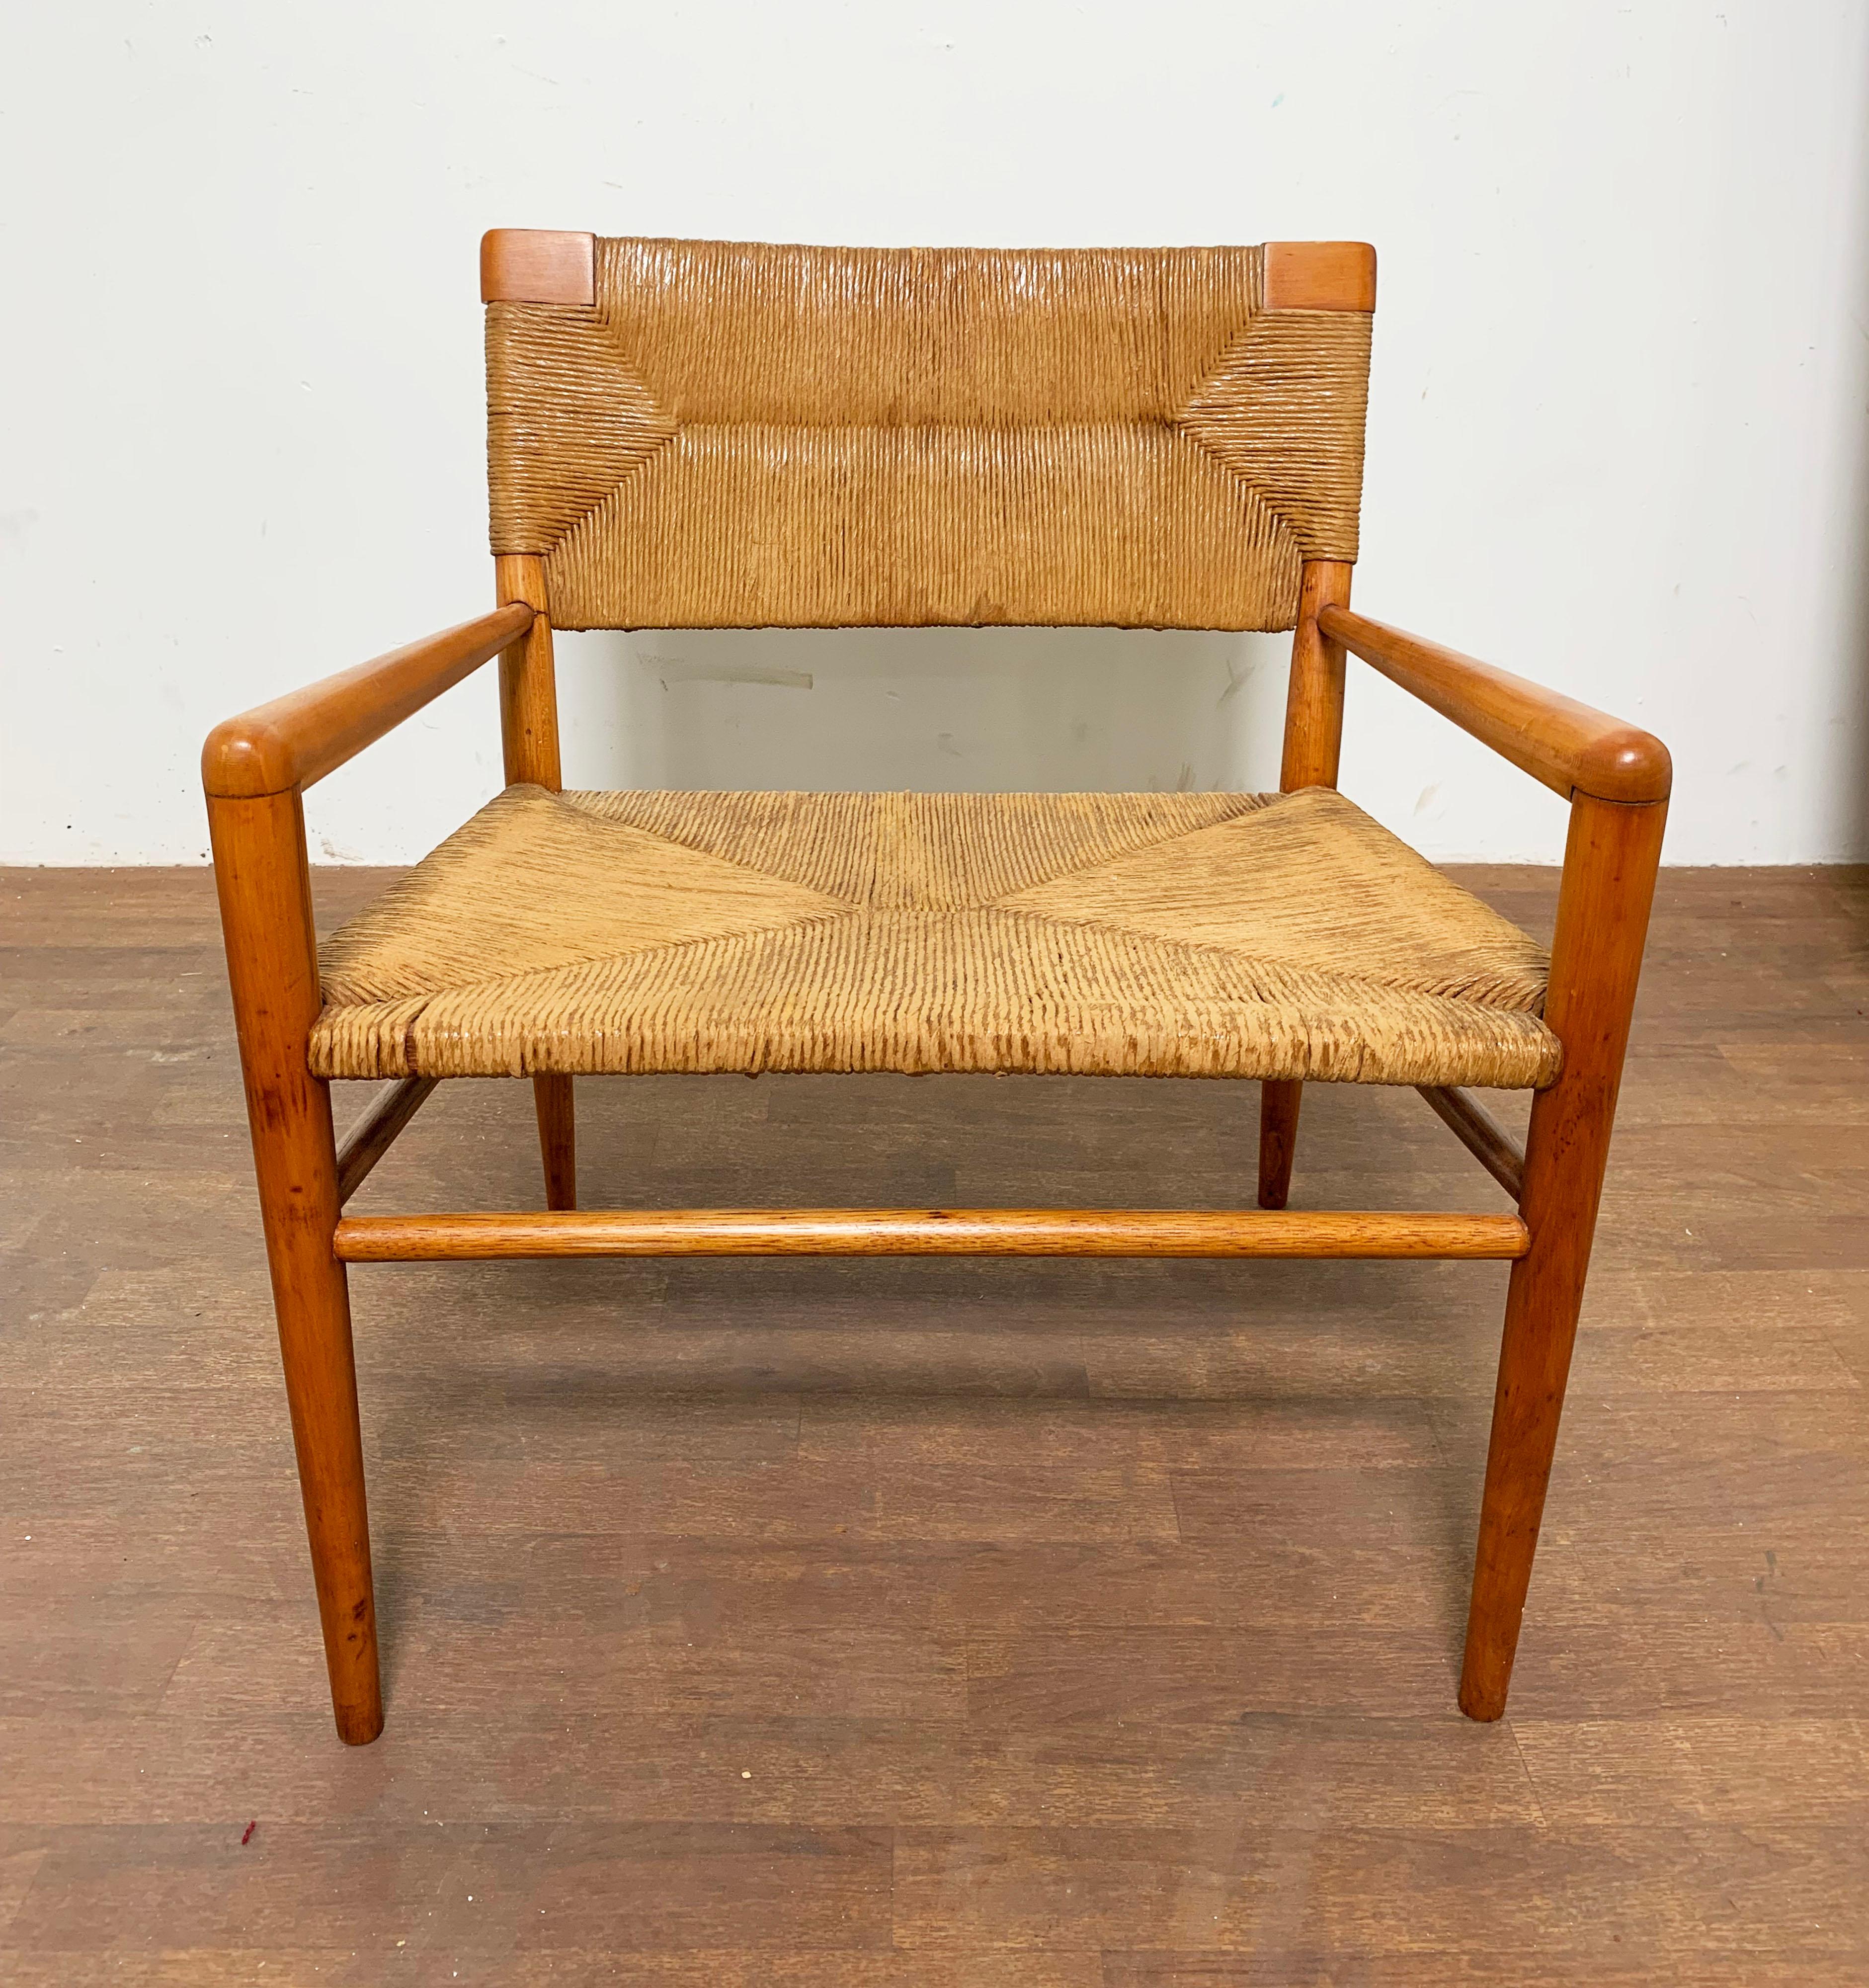 An original lounge chair in birch and rush designed and produced by Mel Smilow in the 1950s.